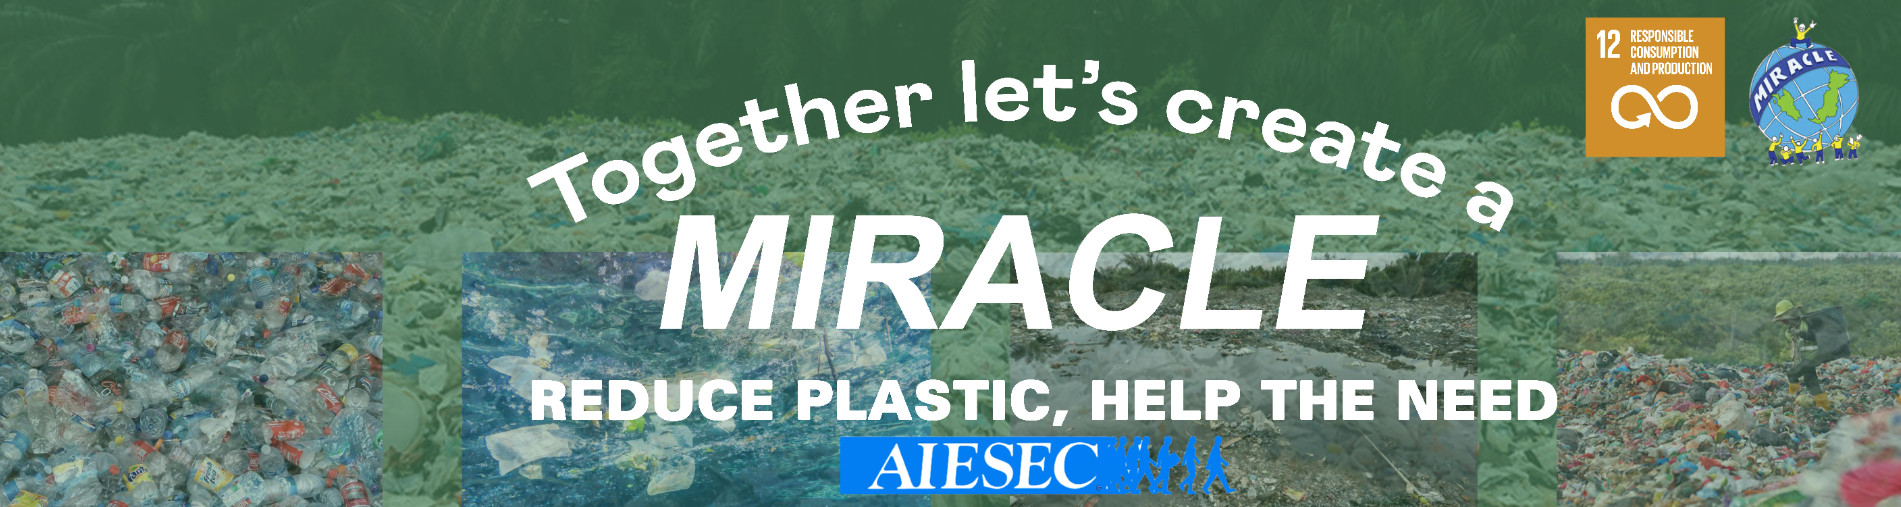 Let's create a MIRACLE - Zero waste fundraise for the need